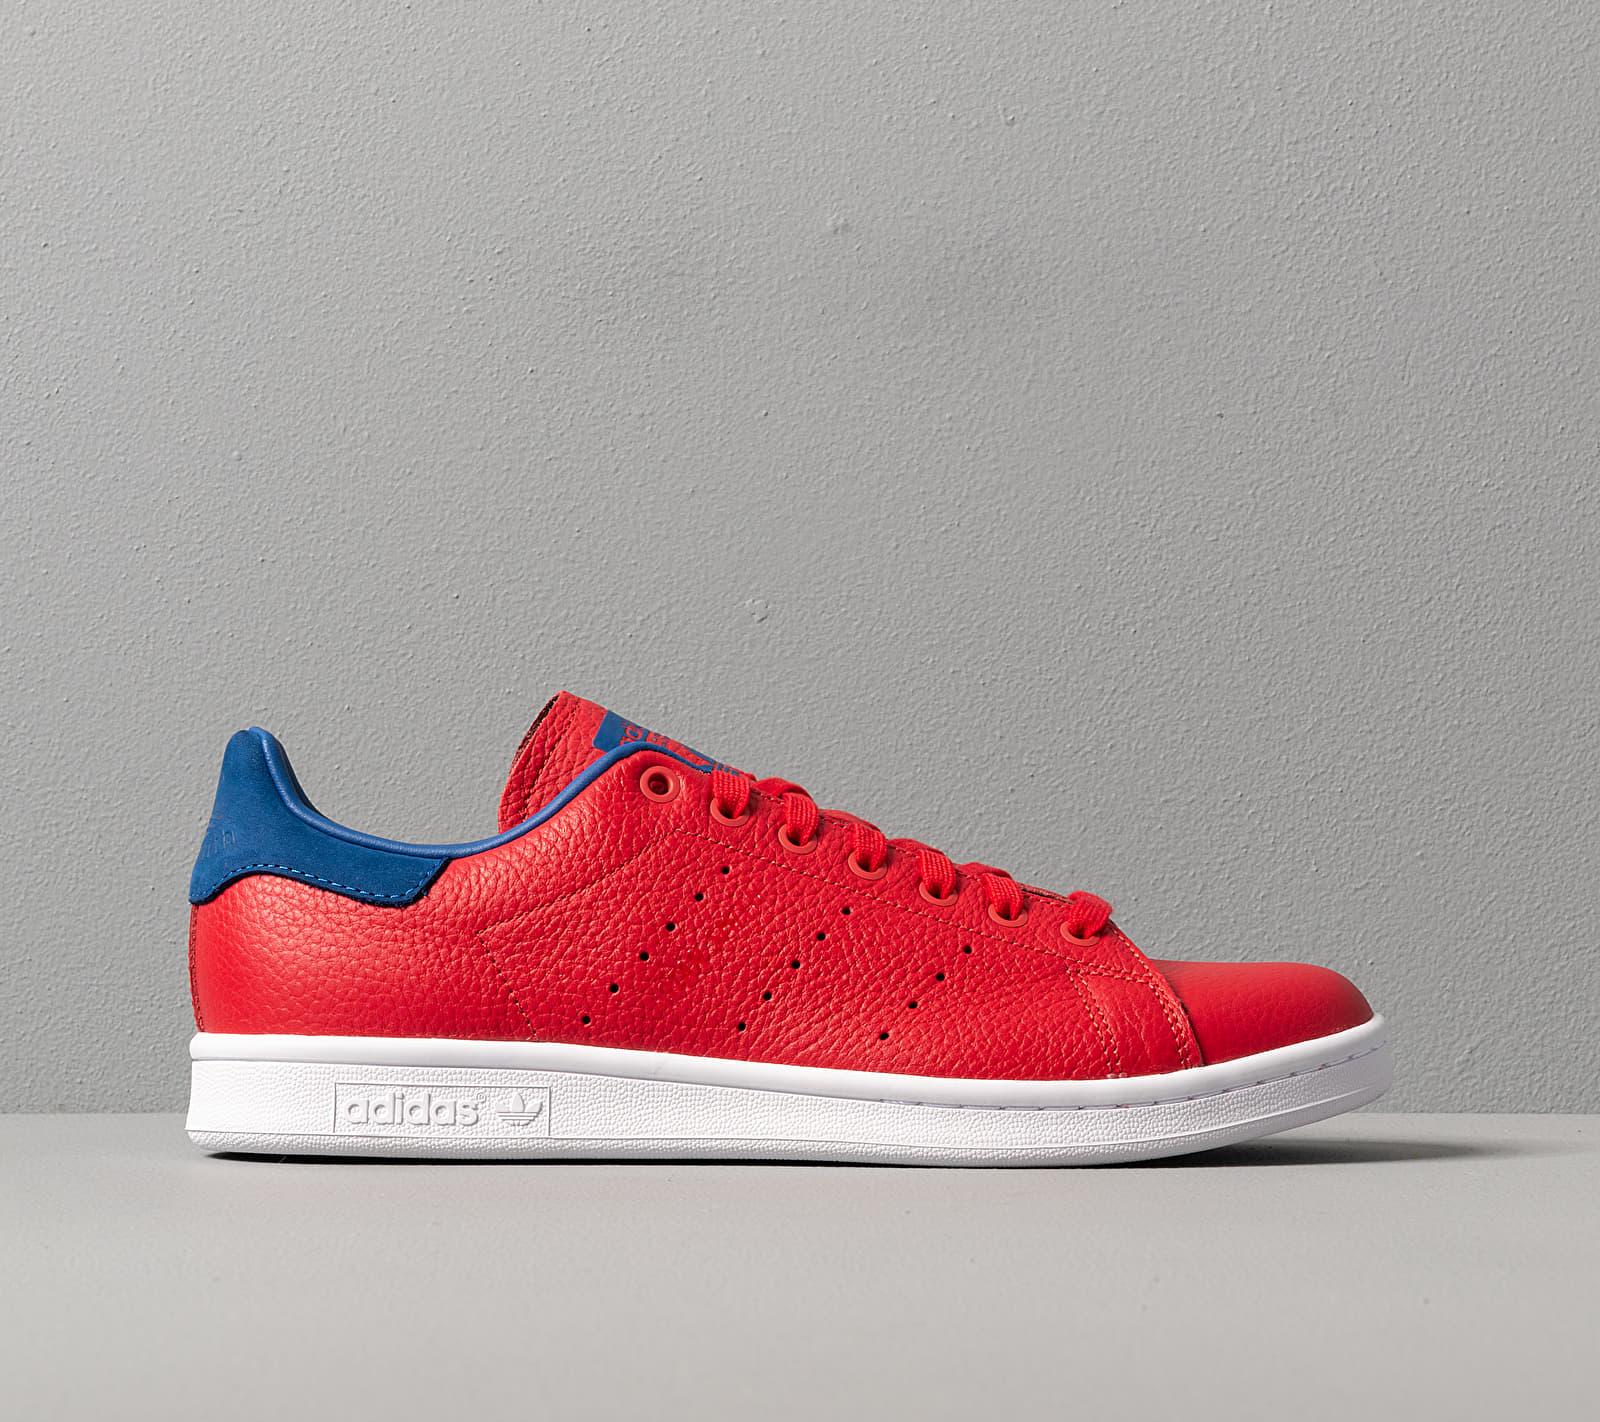 Buy > adidas stan smith scarlet > in stock